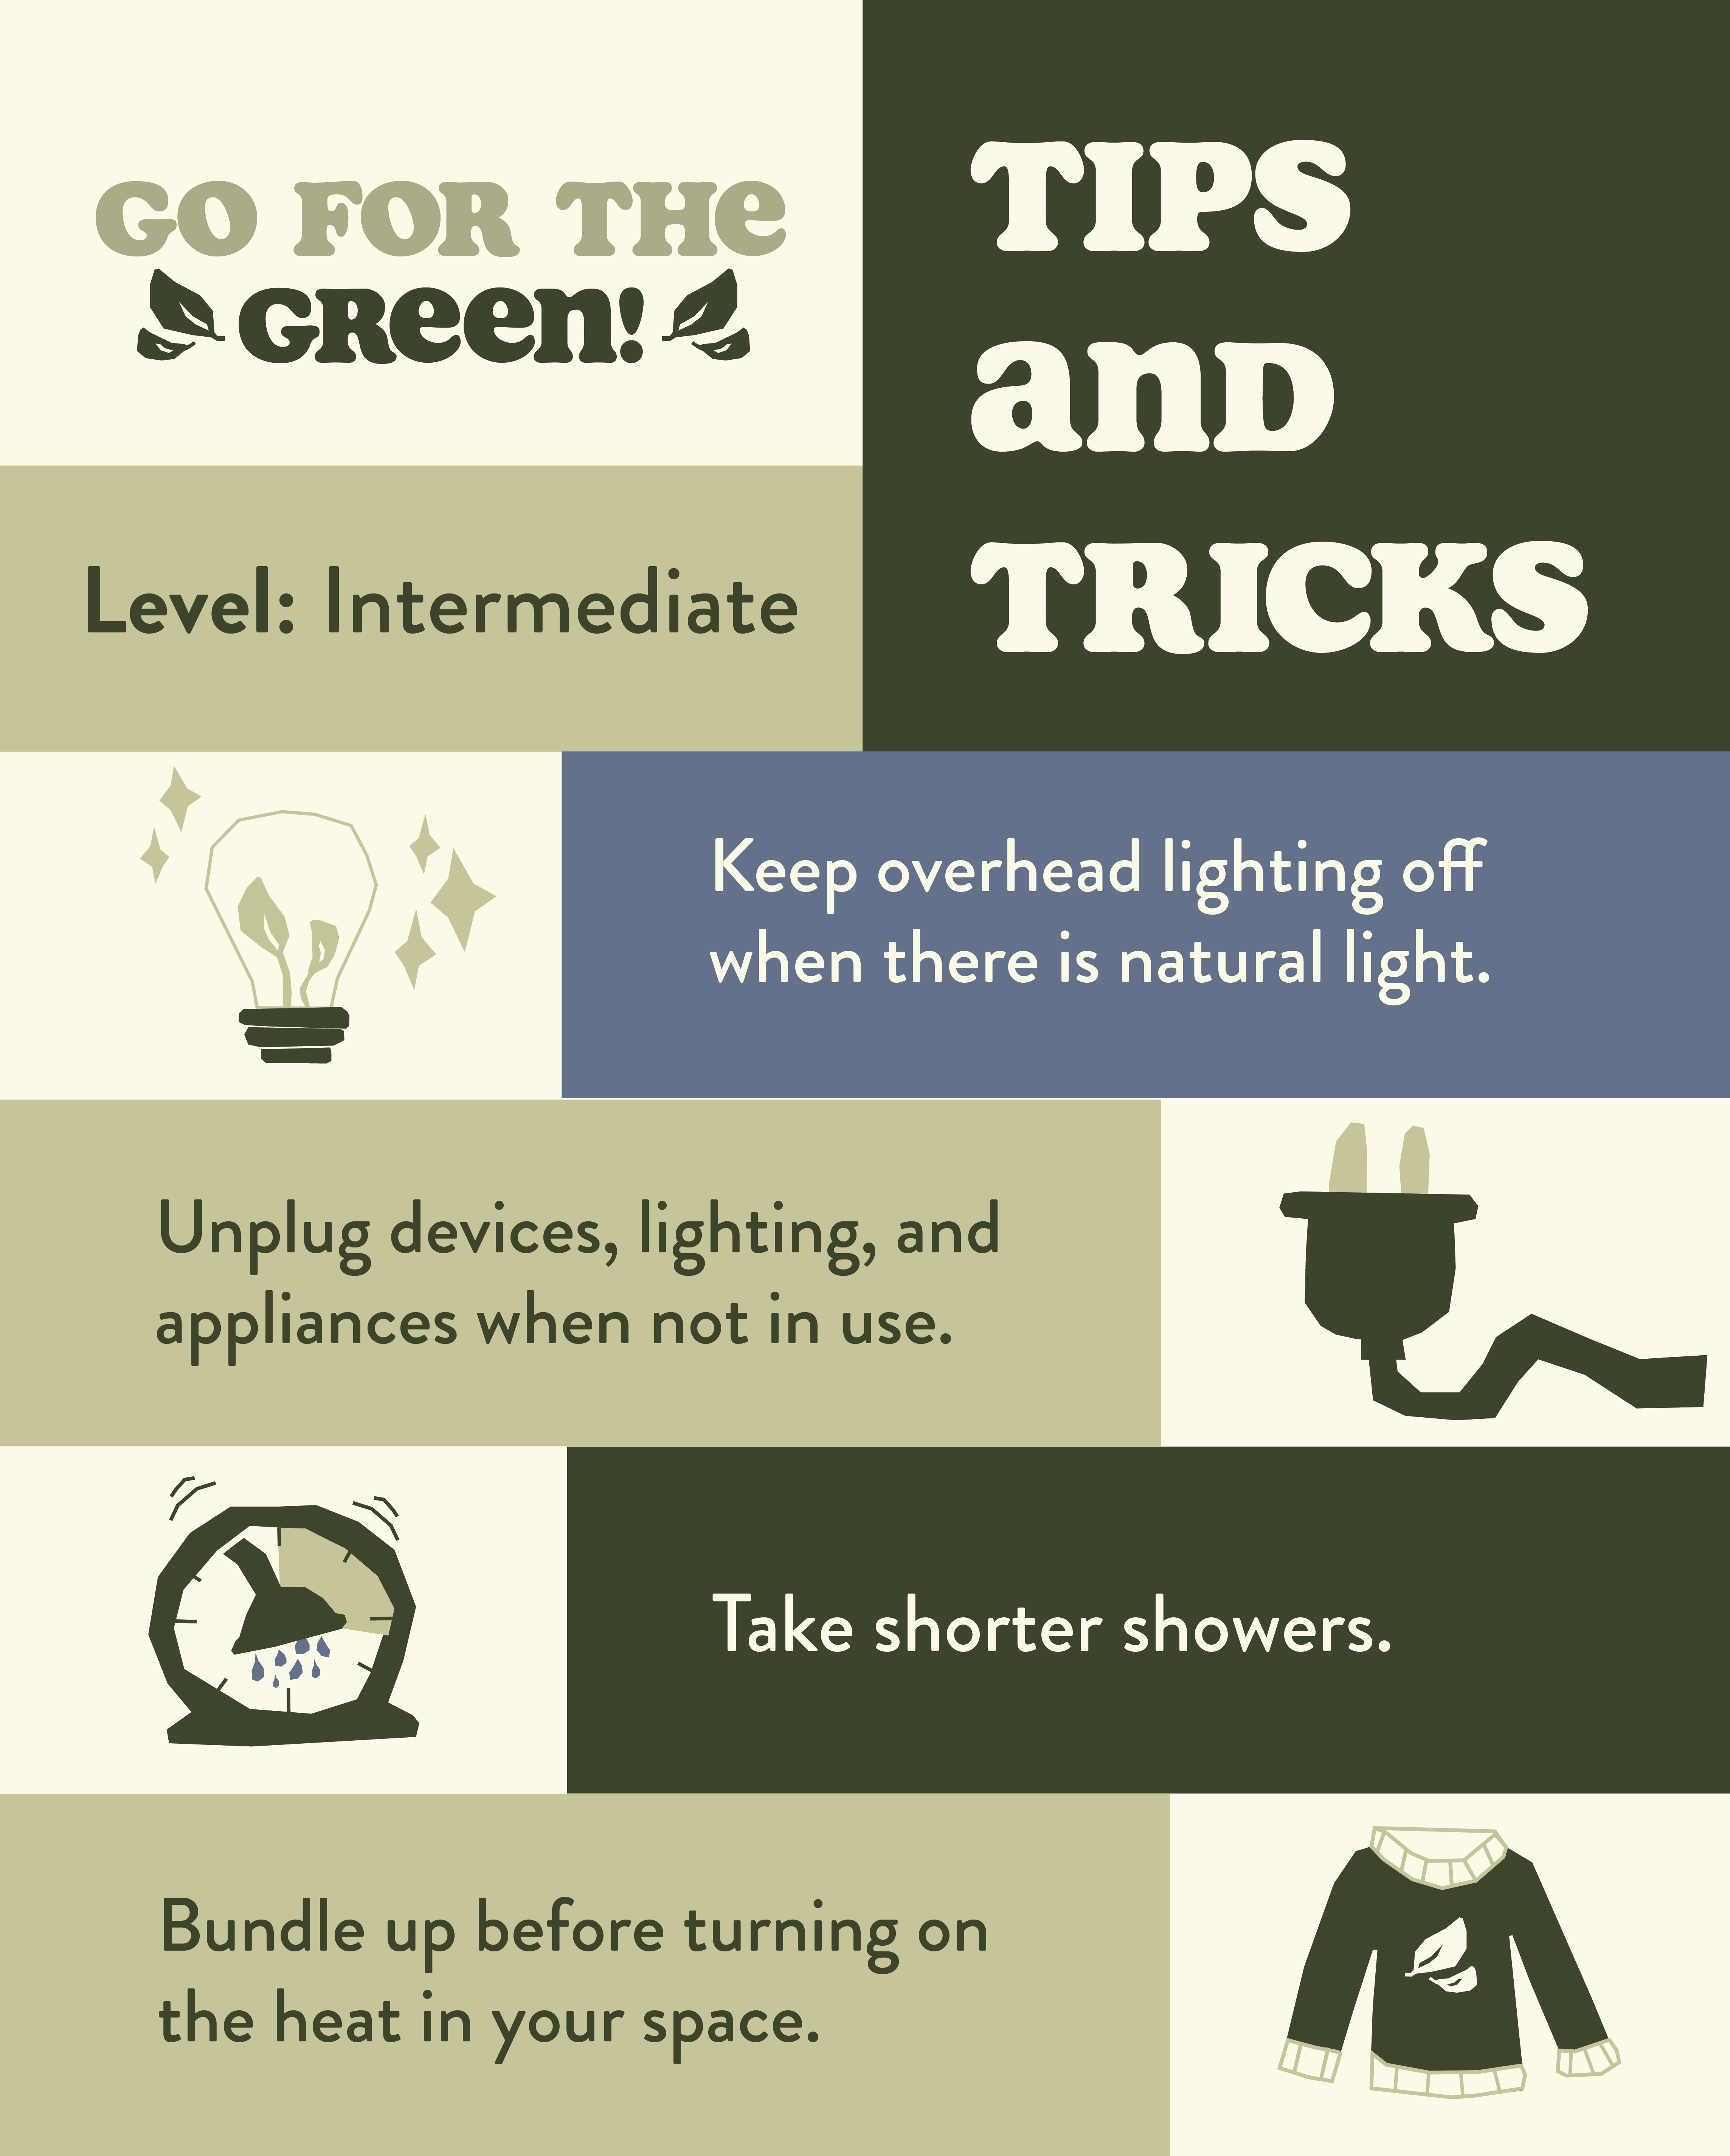 Go for the Green tips & tricks graphic. This includes tips such as; keep overhead lighting off when there is natural light, unplug devices, lighting, and appliances when not in use, taking shorter showers, bundle up before turning on the heat in your space.